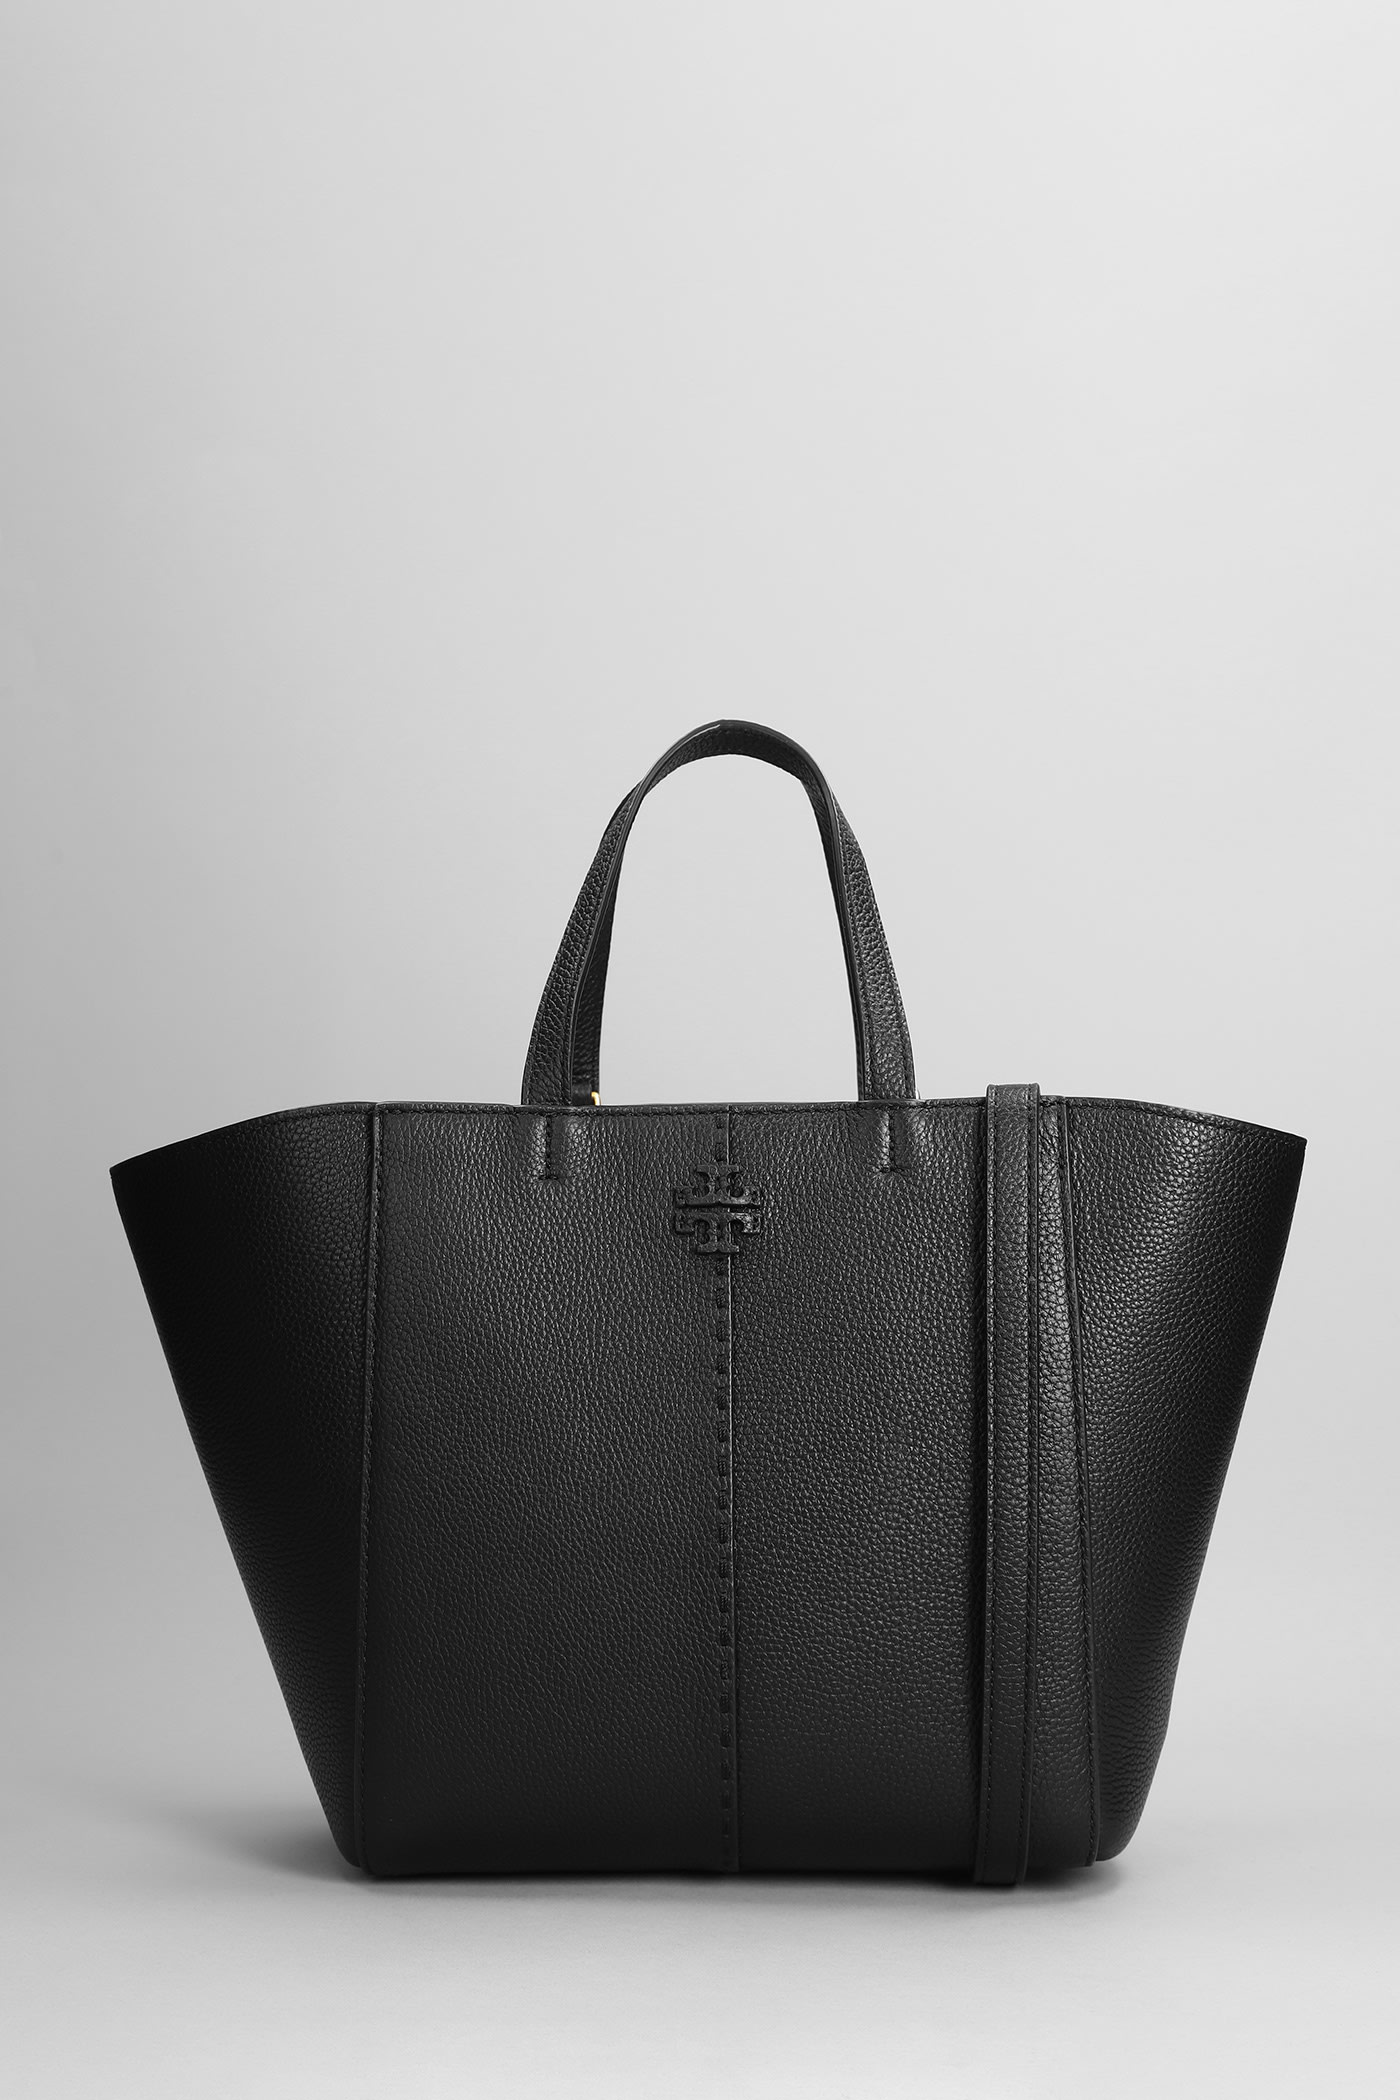 Mcgraw Tote In Black Leather